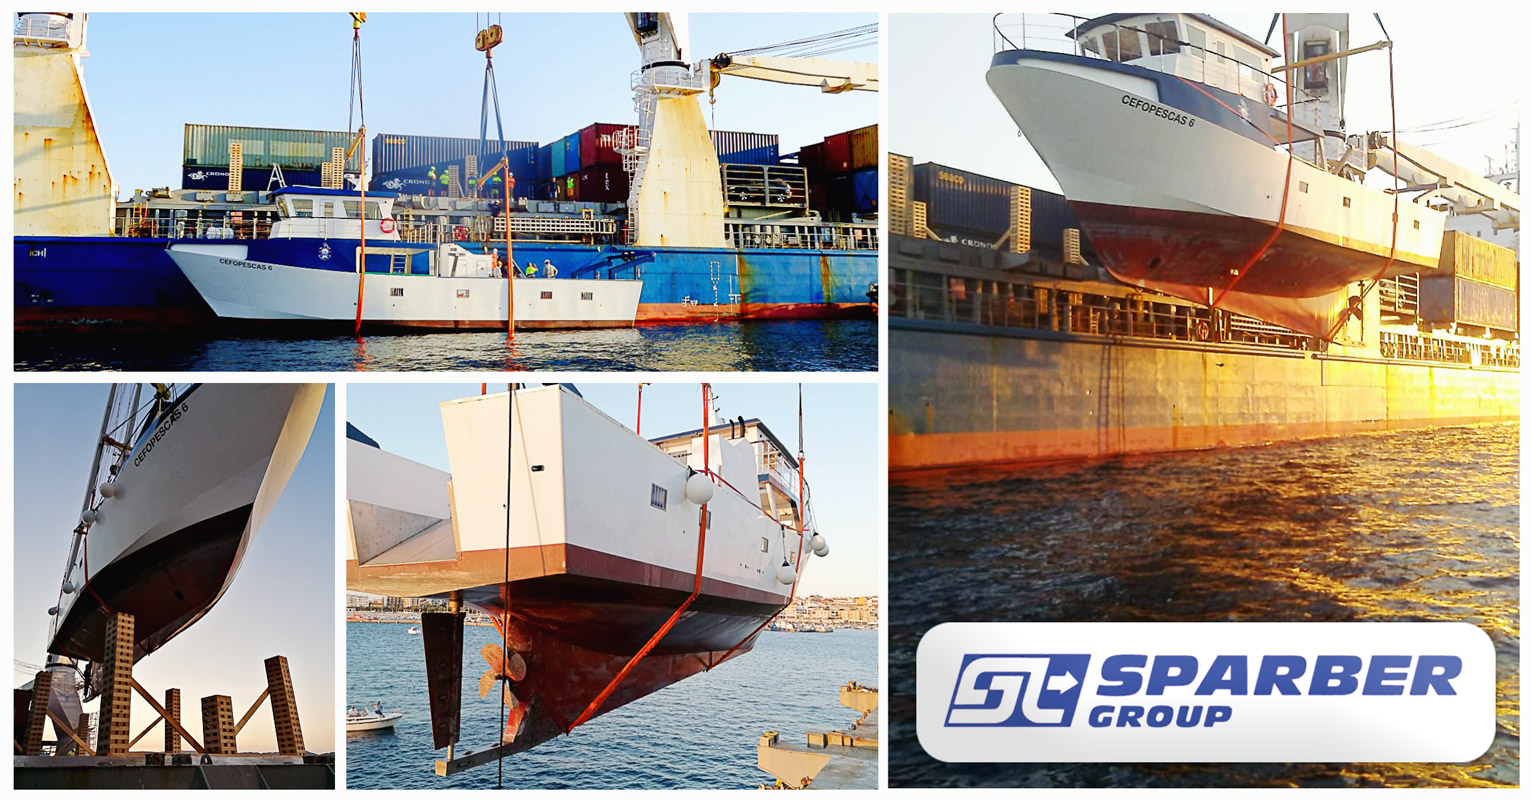 Sparber Group Shipped a Fishing Boat from Palamós, Spain to Luanda, Angola